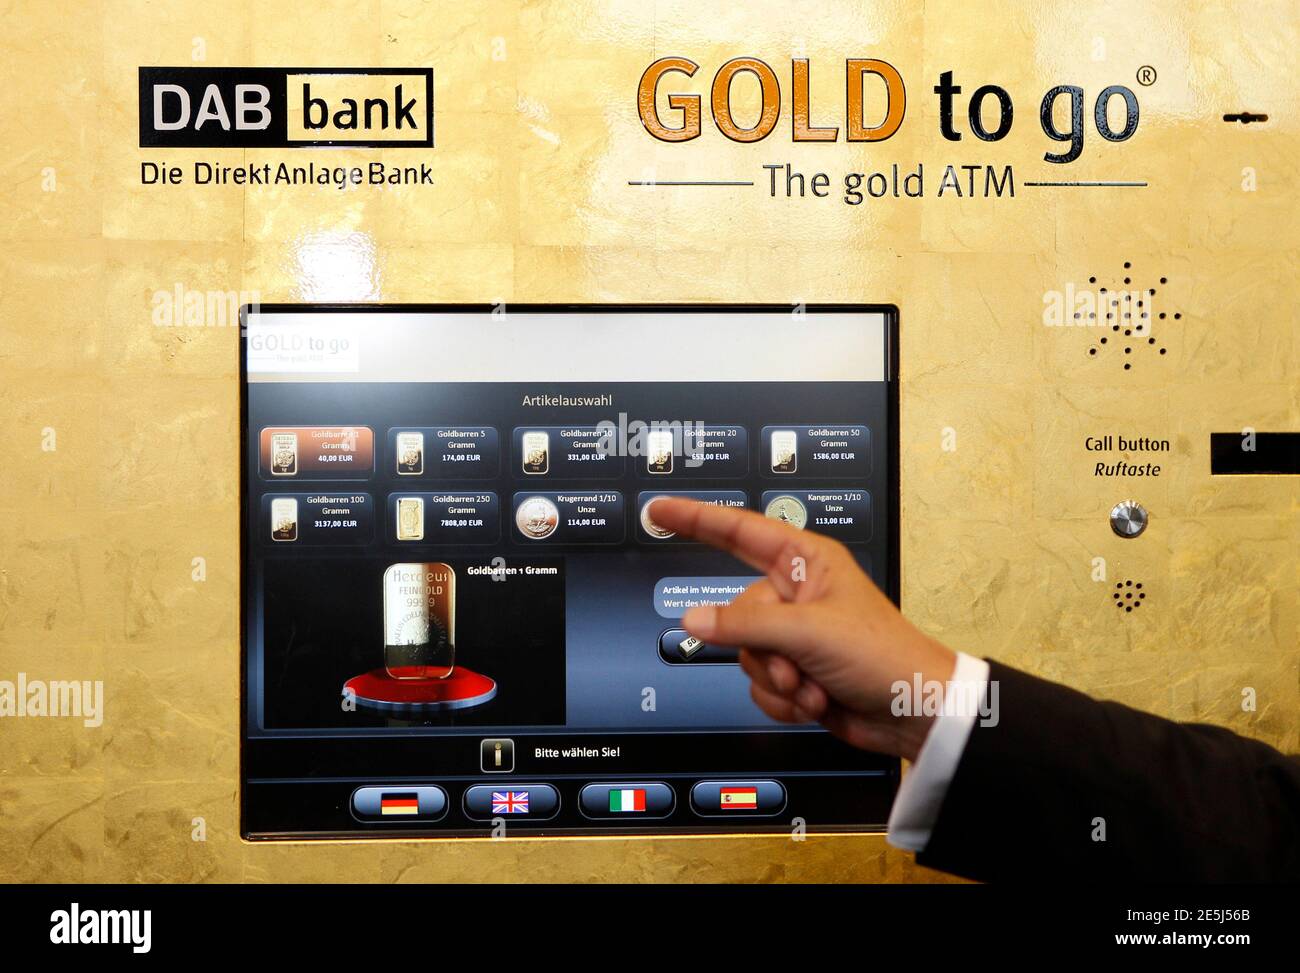 Gold-to-go founder Thomas Geissler demonstrates using one of Germany's  first gold-plated ATM (automated teller machine) in a bank in Munich  September 30, 2010. The machine, which features cutting-edge technology,  dispenses 1g, 5g,